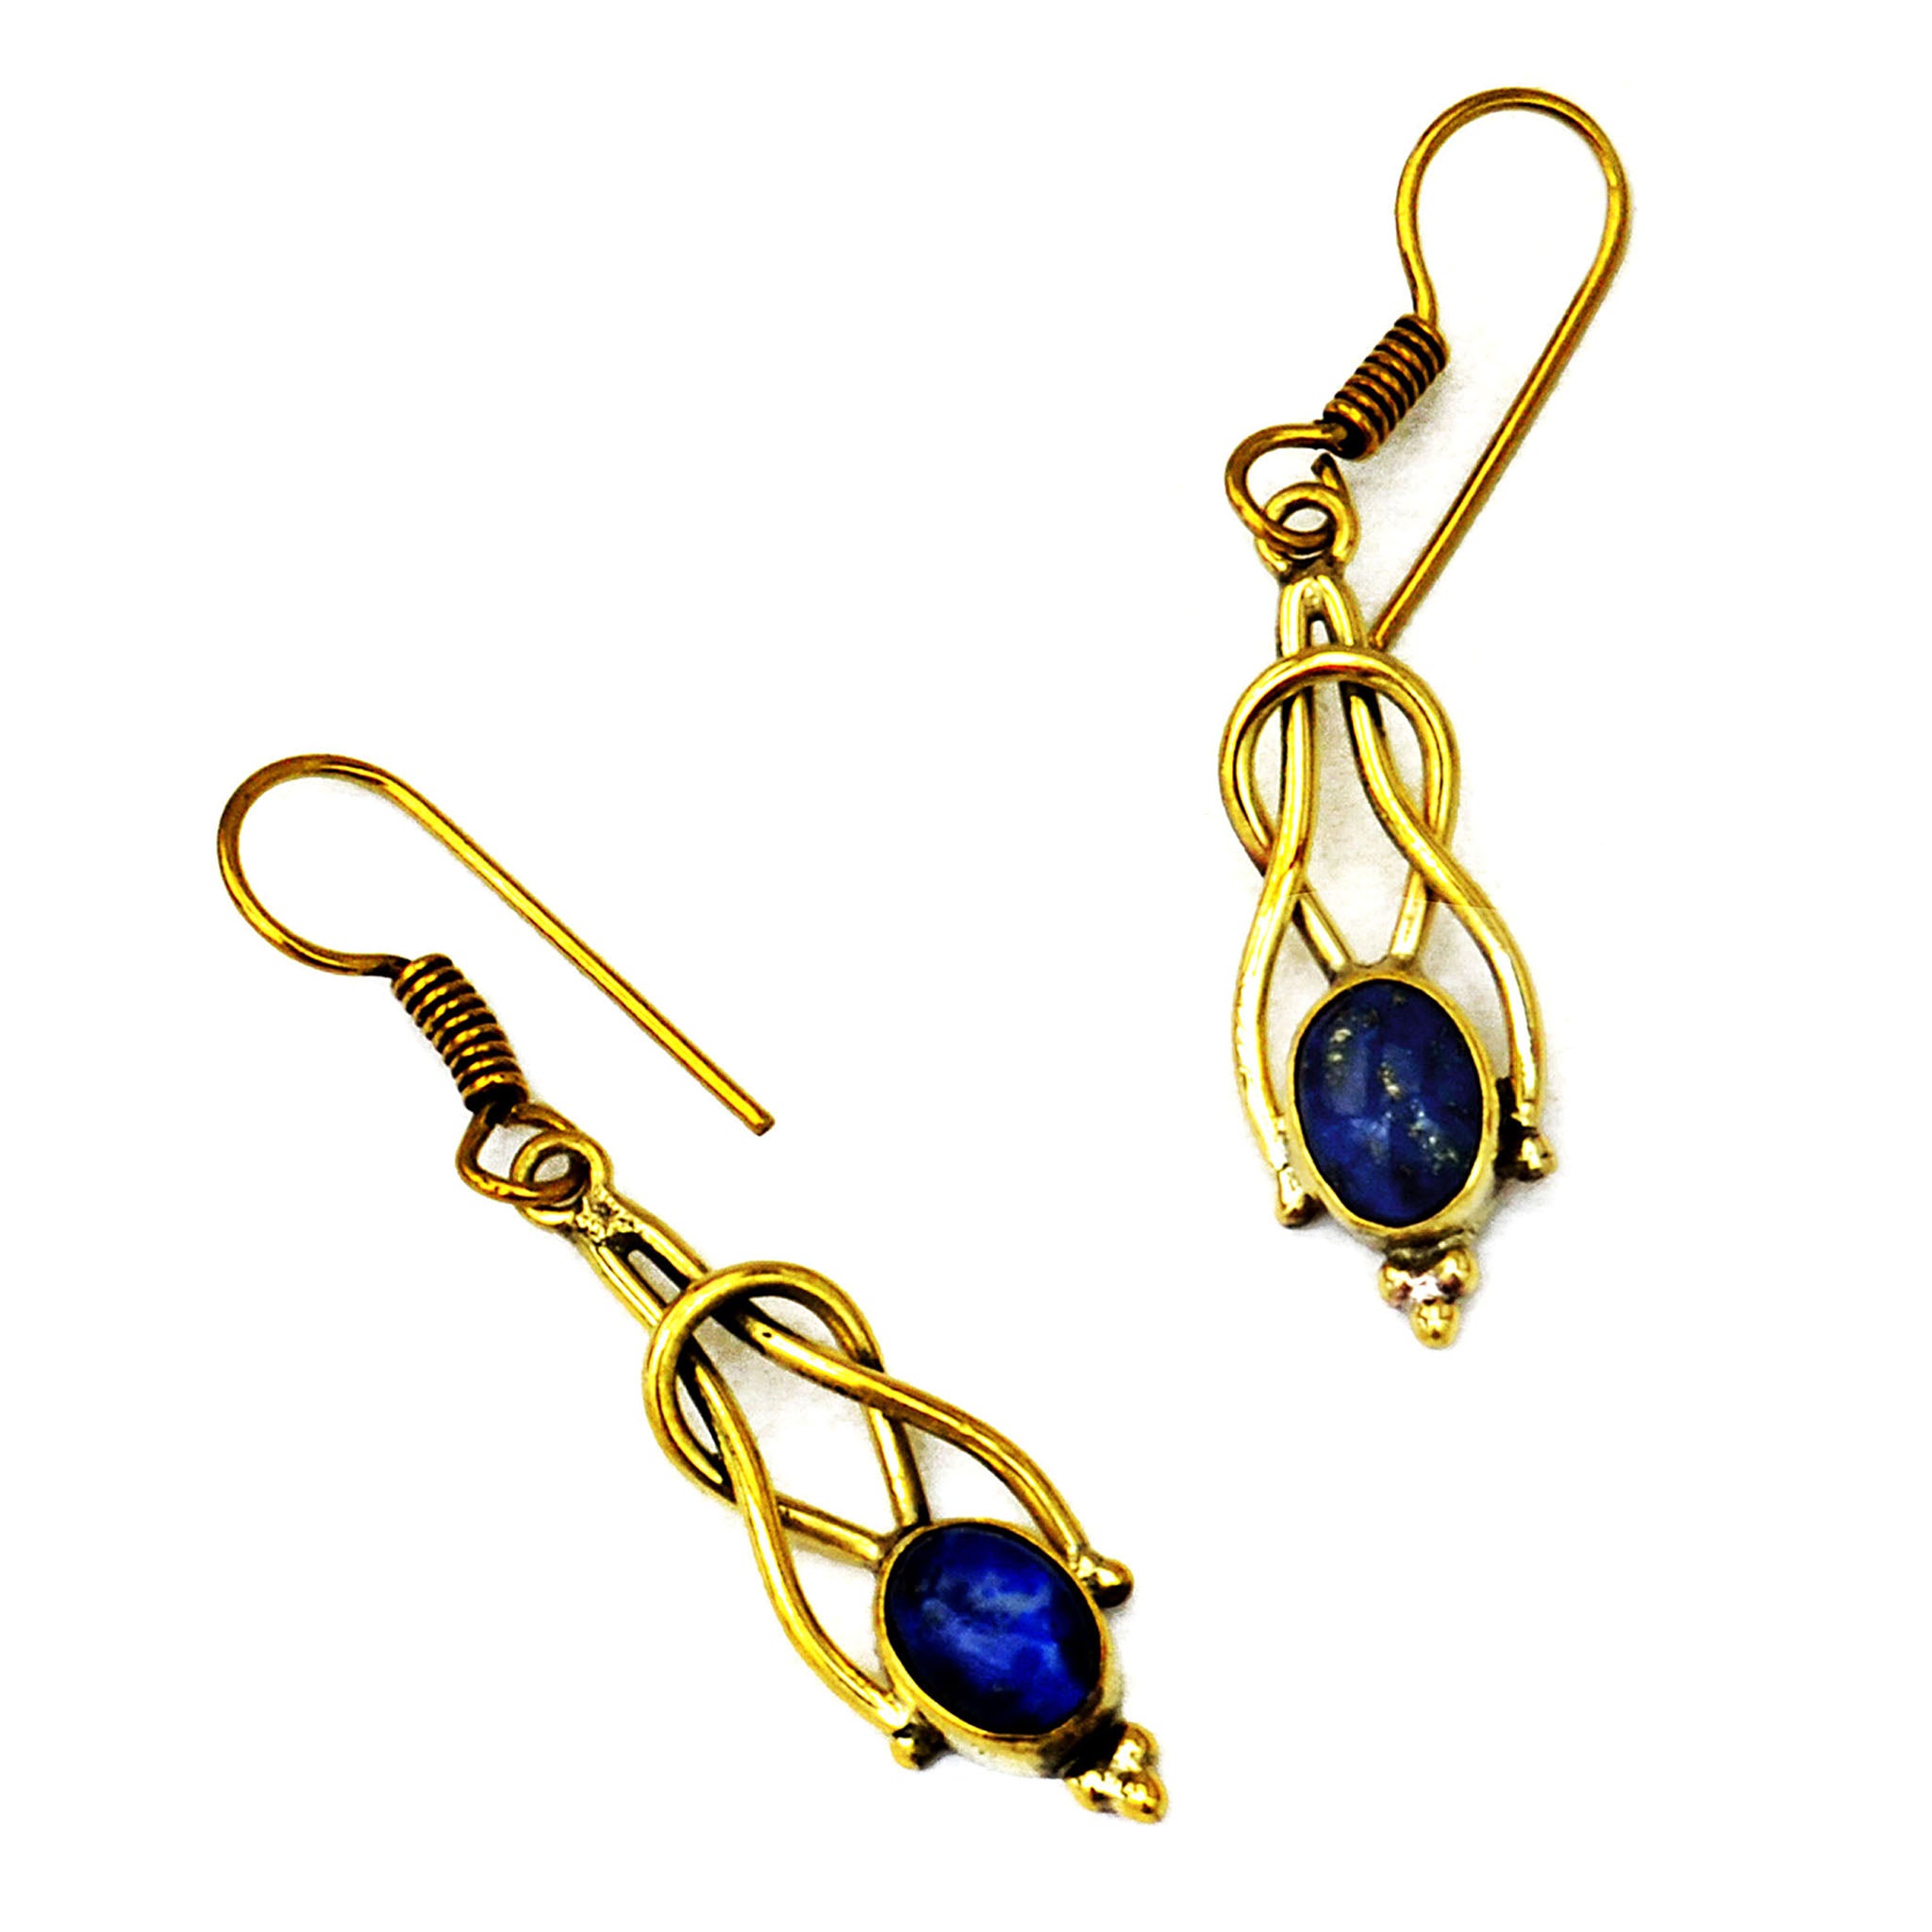 Vintage earrings with lapis